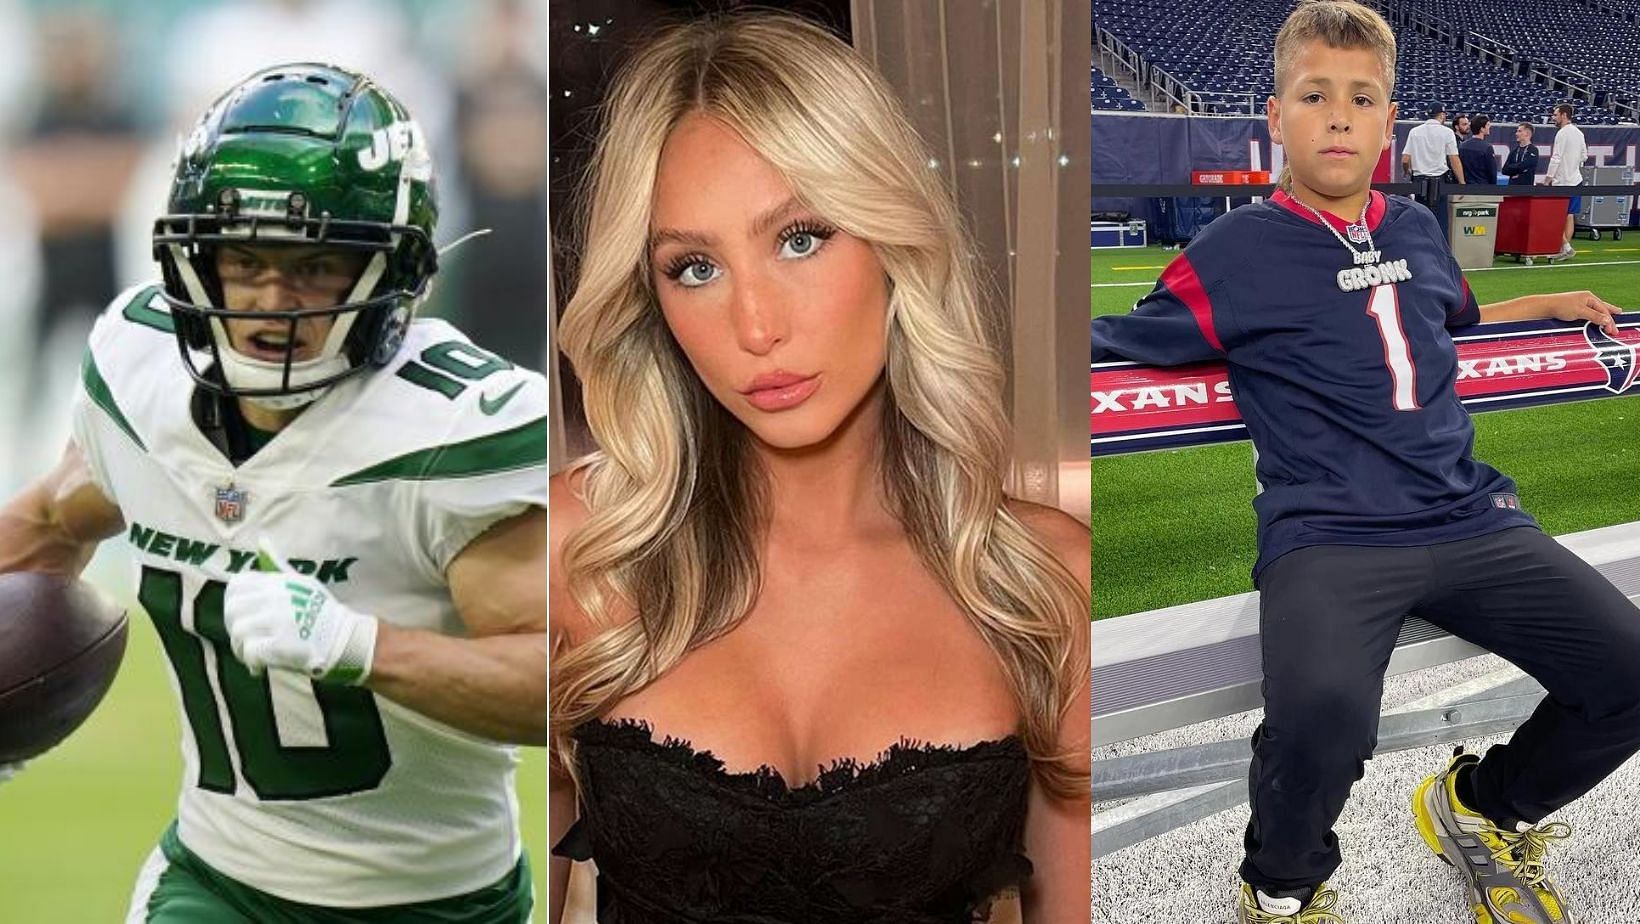 What's Going on With TikToker Alix Earle and NFL Star Braxton Berrios?